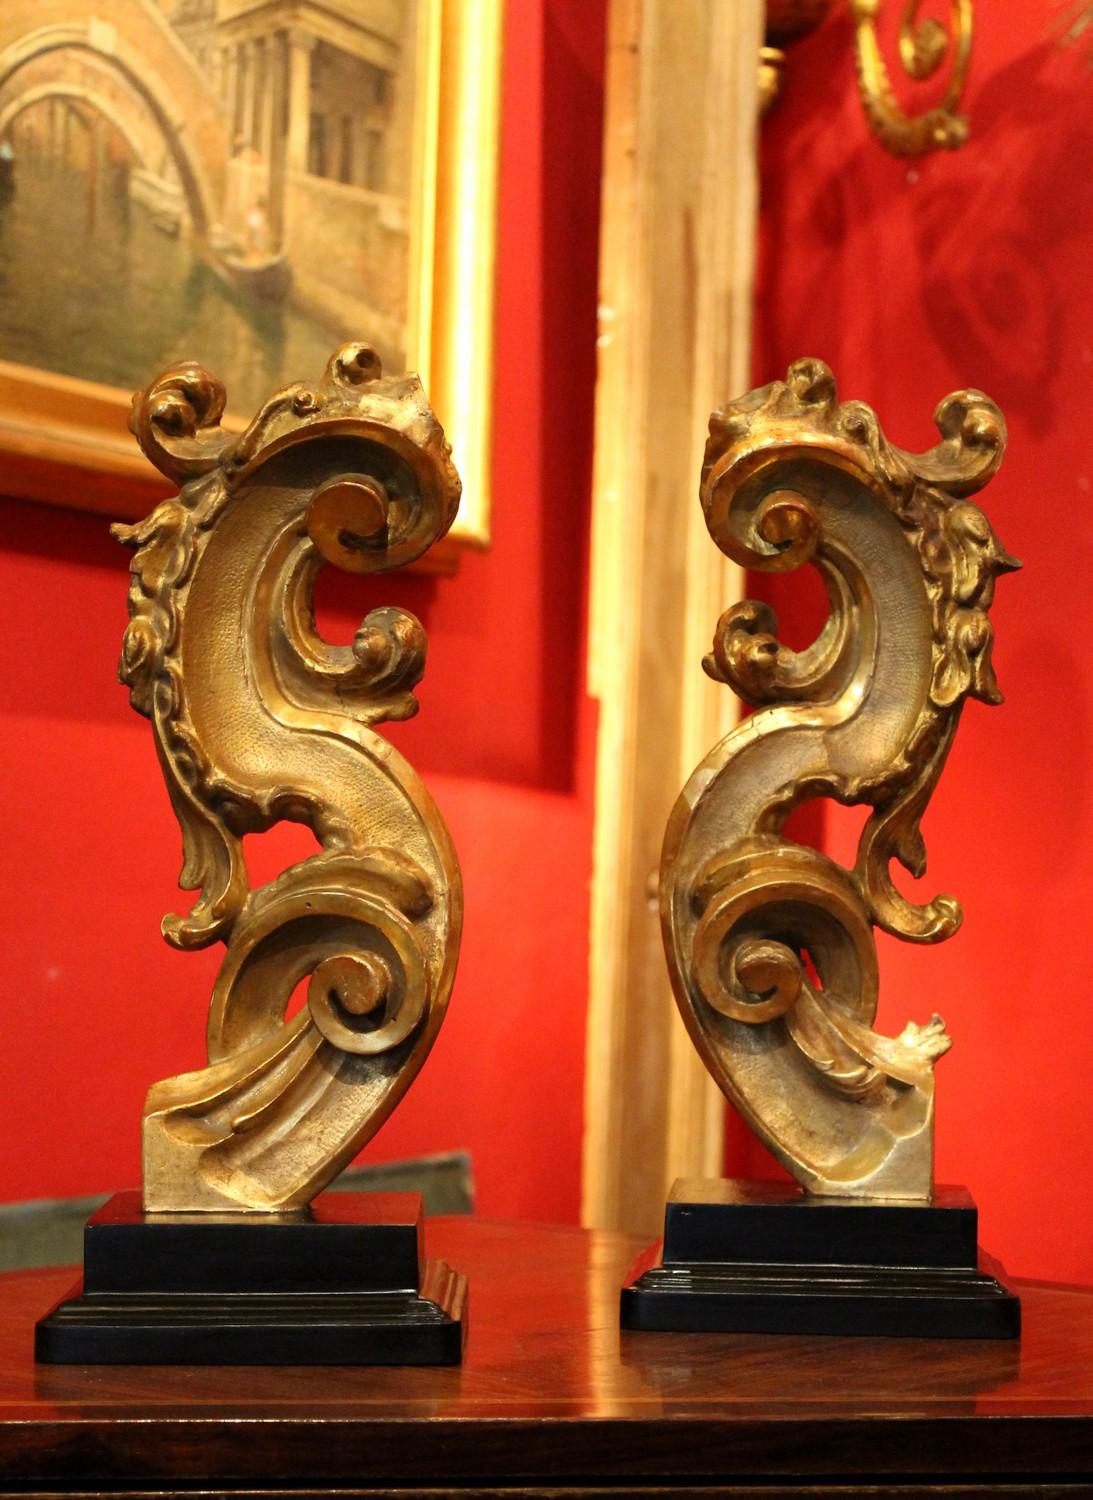 Elegantly hand carved in deep relief and gilt with gold leaves, these Italian giltwood fragments feature an S-shape rich in scrolls, leaf and flowers motifs.
Water shiny and matte gilt alternates in these 18th century Rococo gilded wood fragments